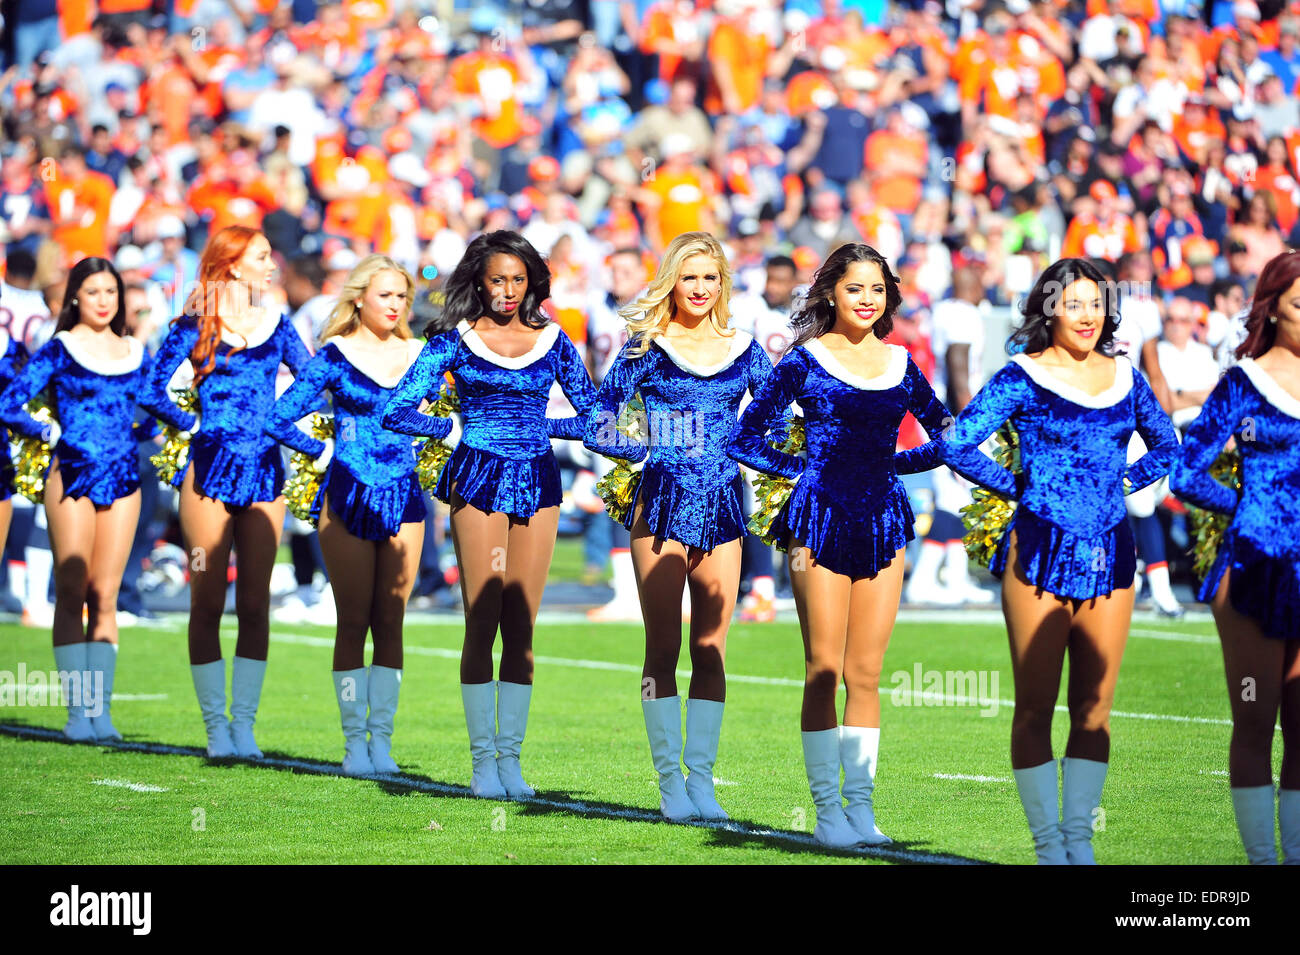 December 14, 2014 San Diego Chargers cheerleaders during the NFL Football game between the Denver Broncos and the San Diego Chargers at the Qualcomm Stadium in San Diego, California.Charles Baus/CSM Stock Photo